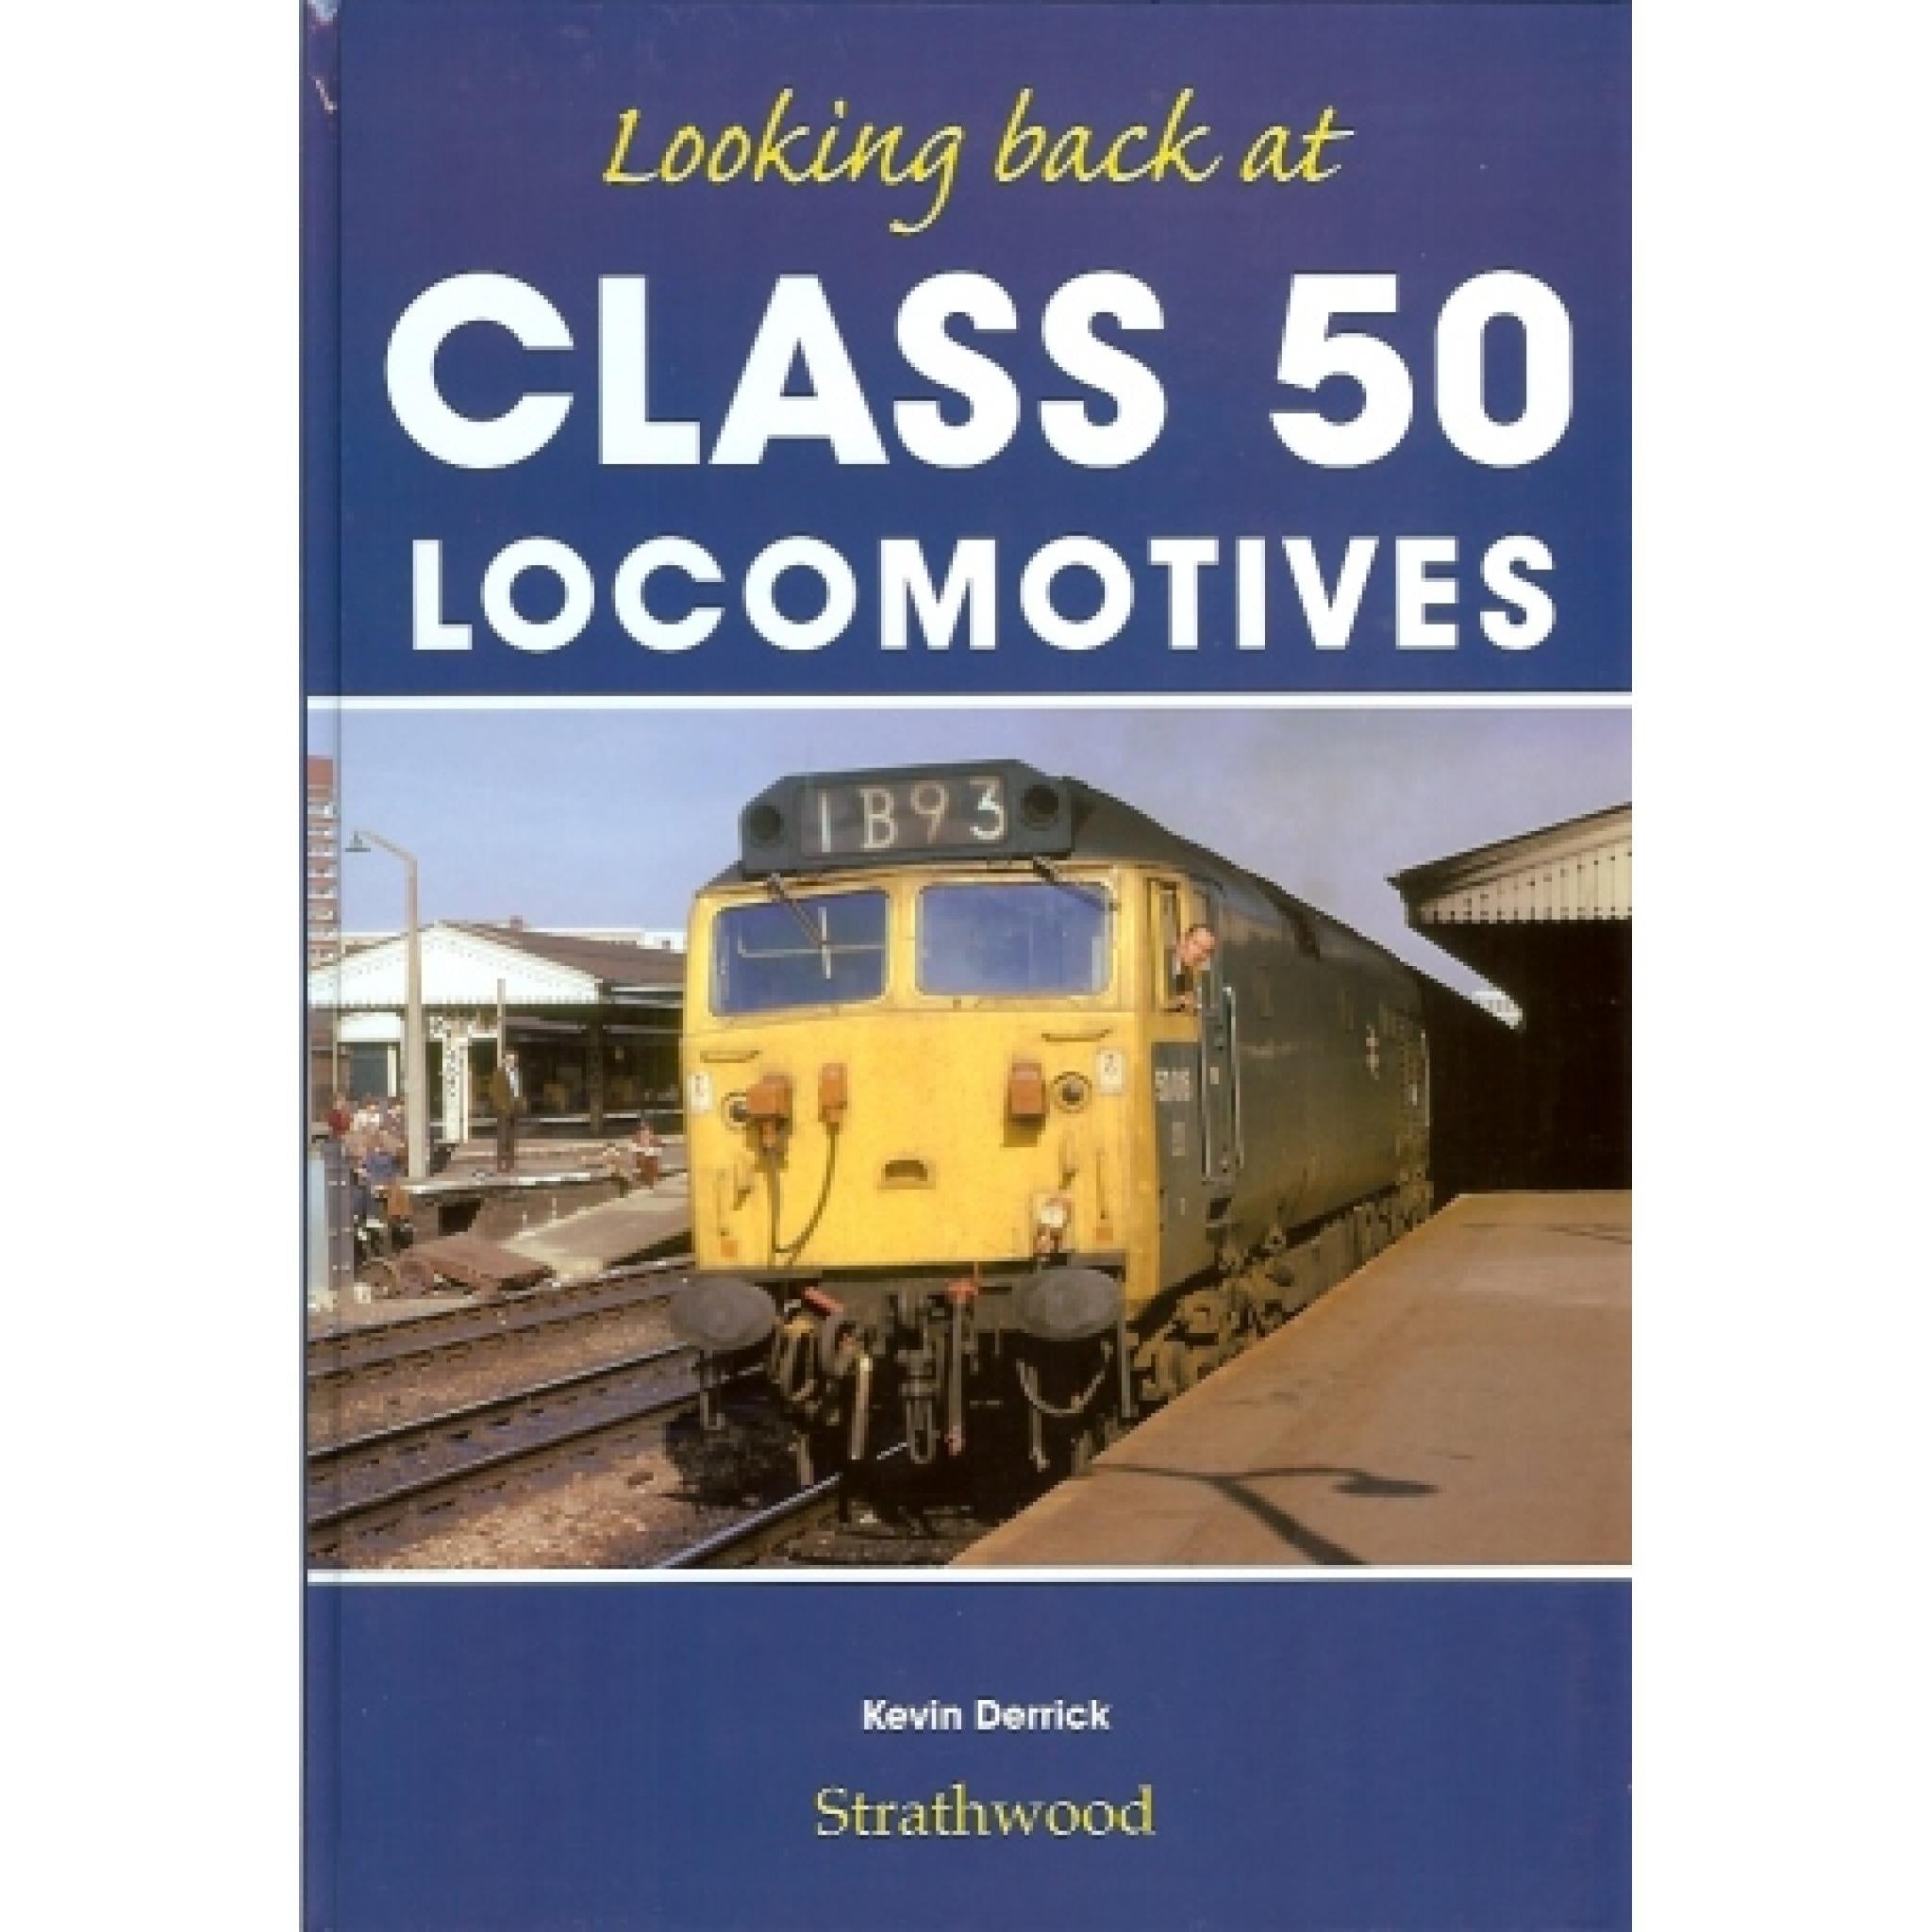 Looking back at CLASS 50 Locomotives